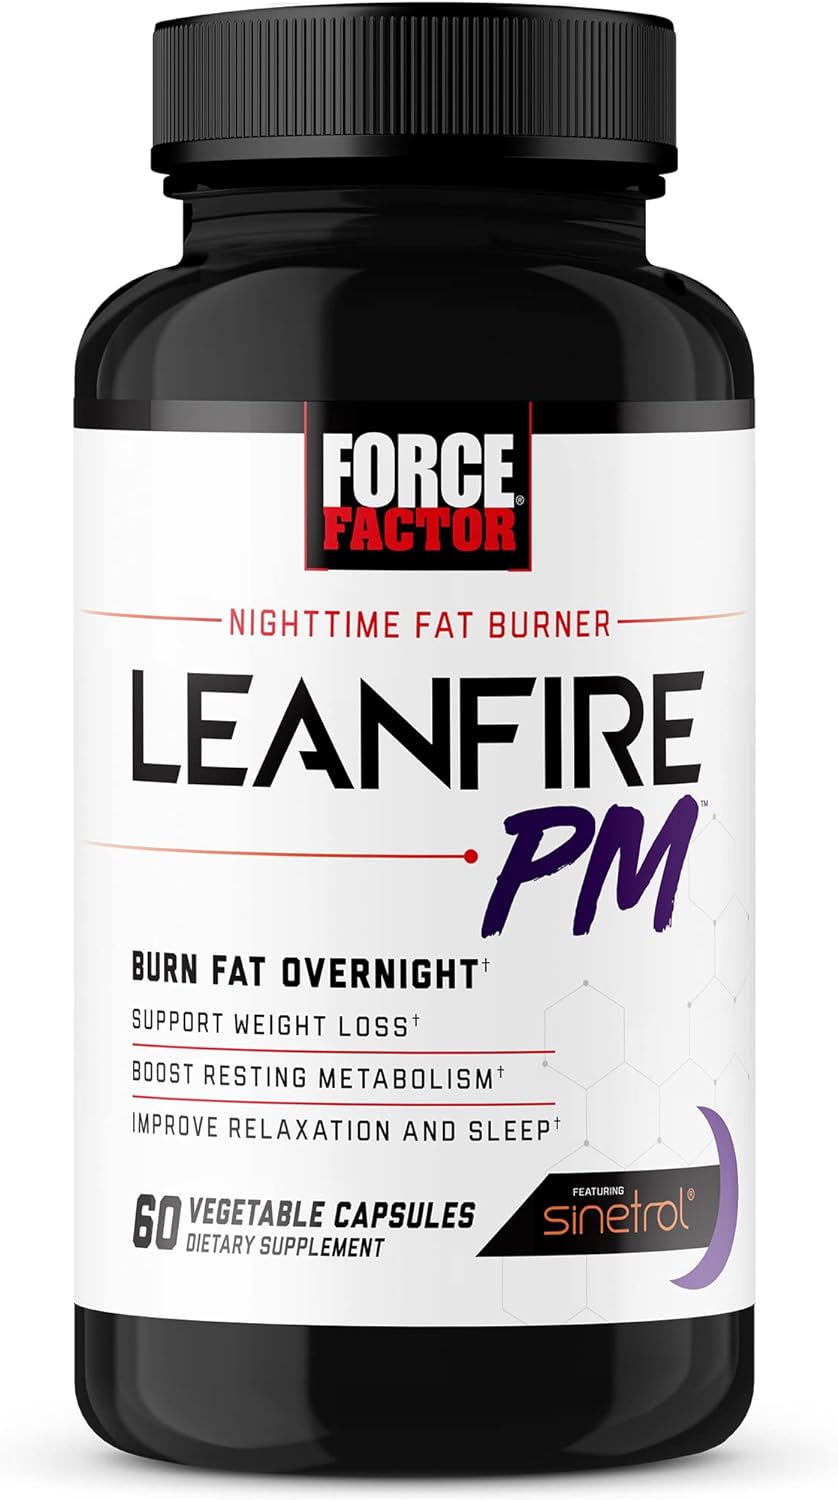 Force Factor LeanFire PM Weight Loss Pills for Women & Men, Fat Burner & Overnight Weight Loss Pills to Burn Fat, Boost Metabolism, Improve Sleep, Powerful Formula for Incredible Results, 60 Capsules